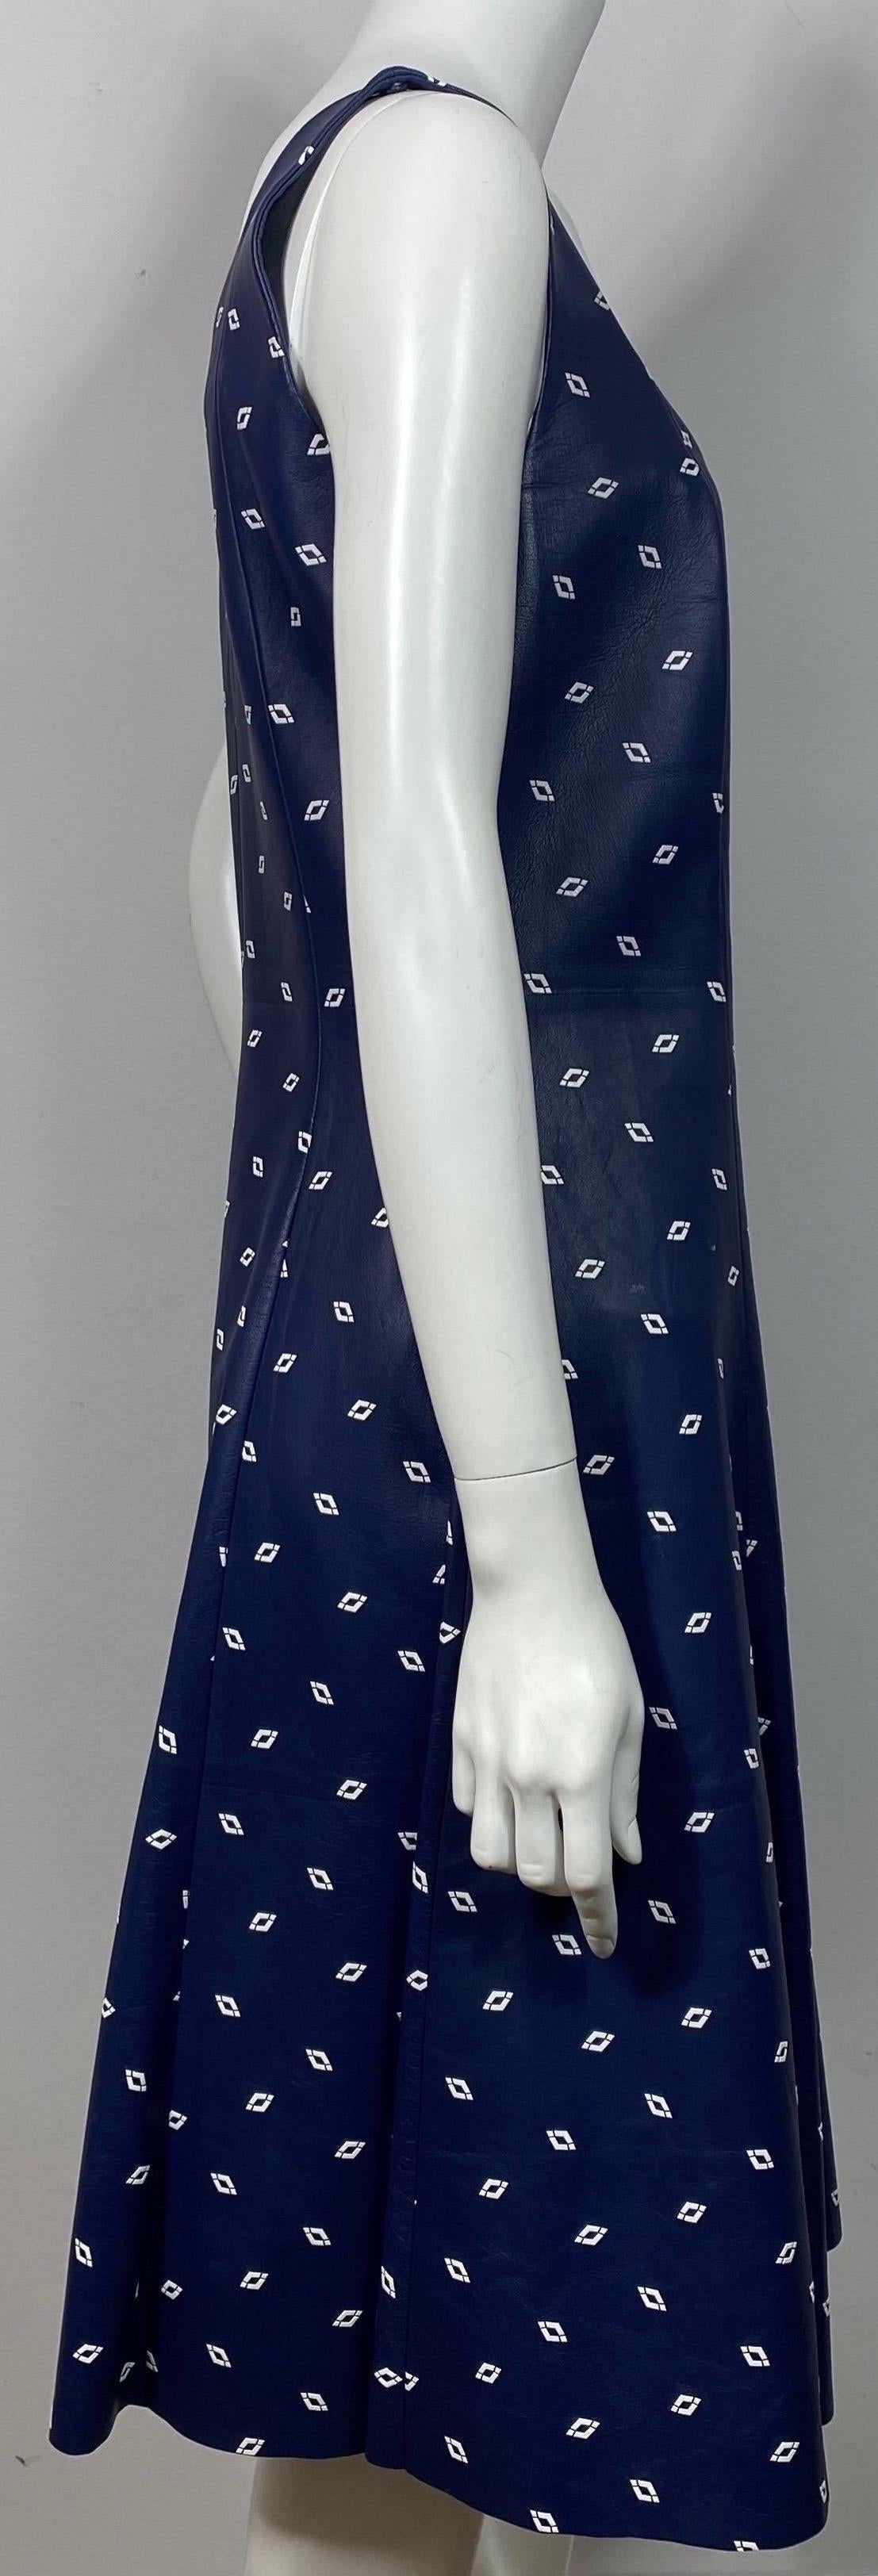 Ralph Lauren Purple Label Navy and White Leather Dress - Size 10 For Sale 2